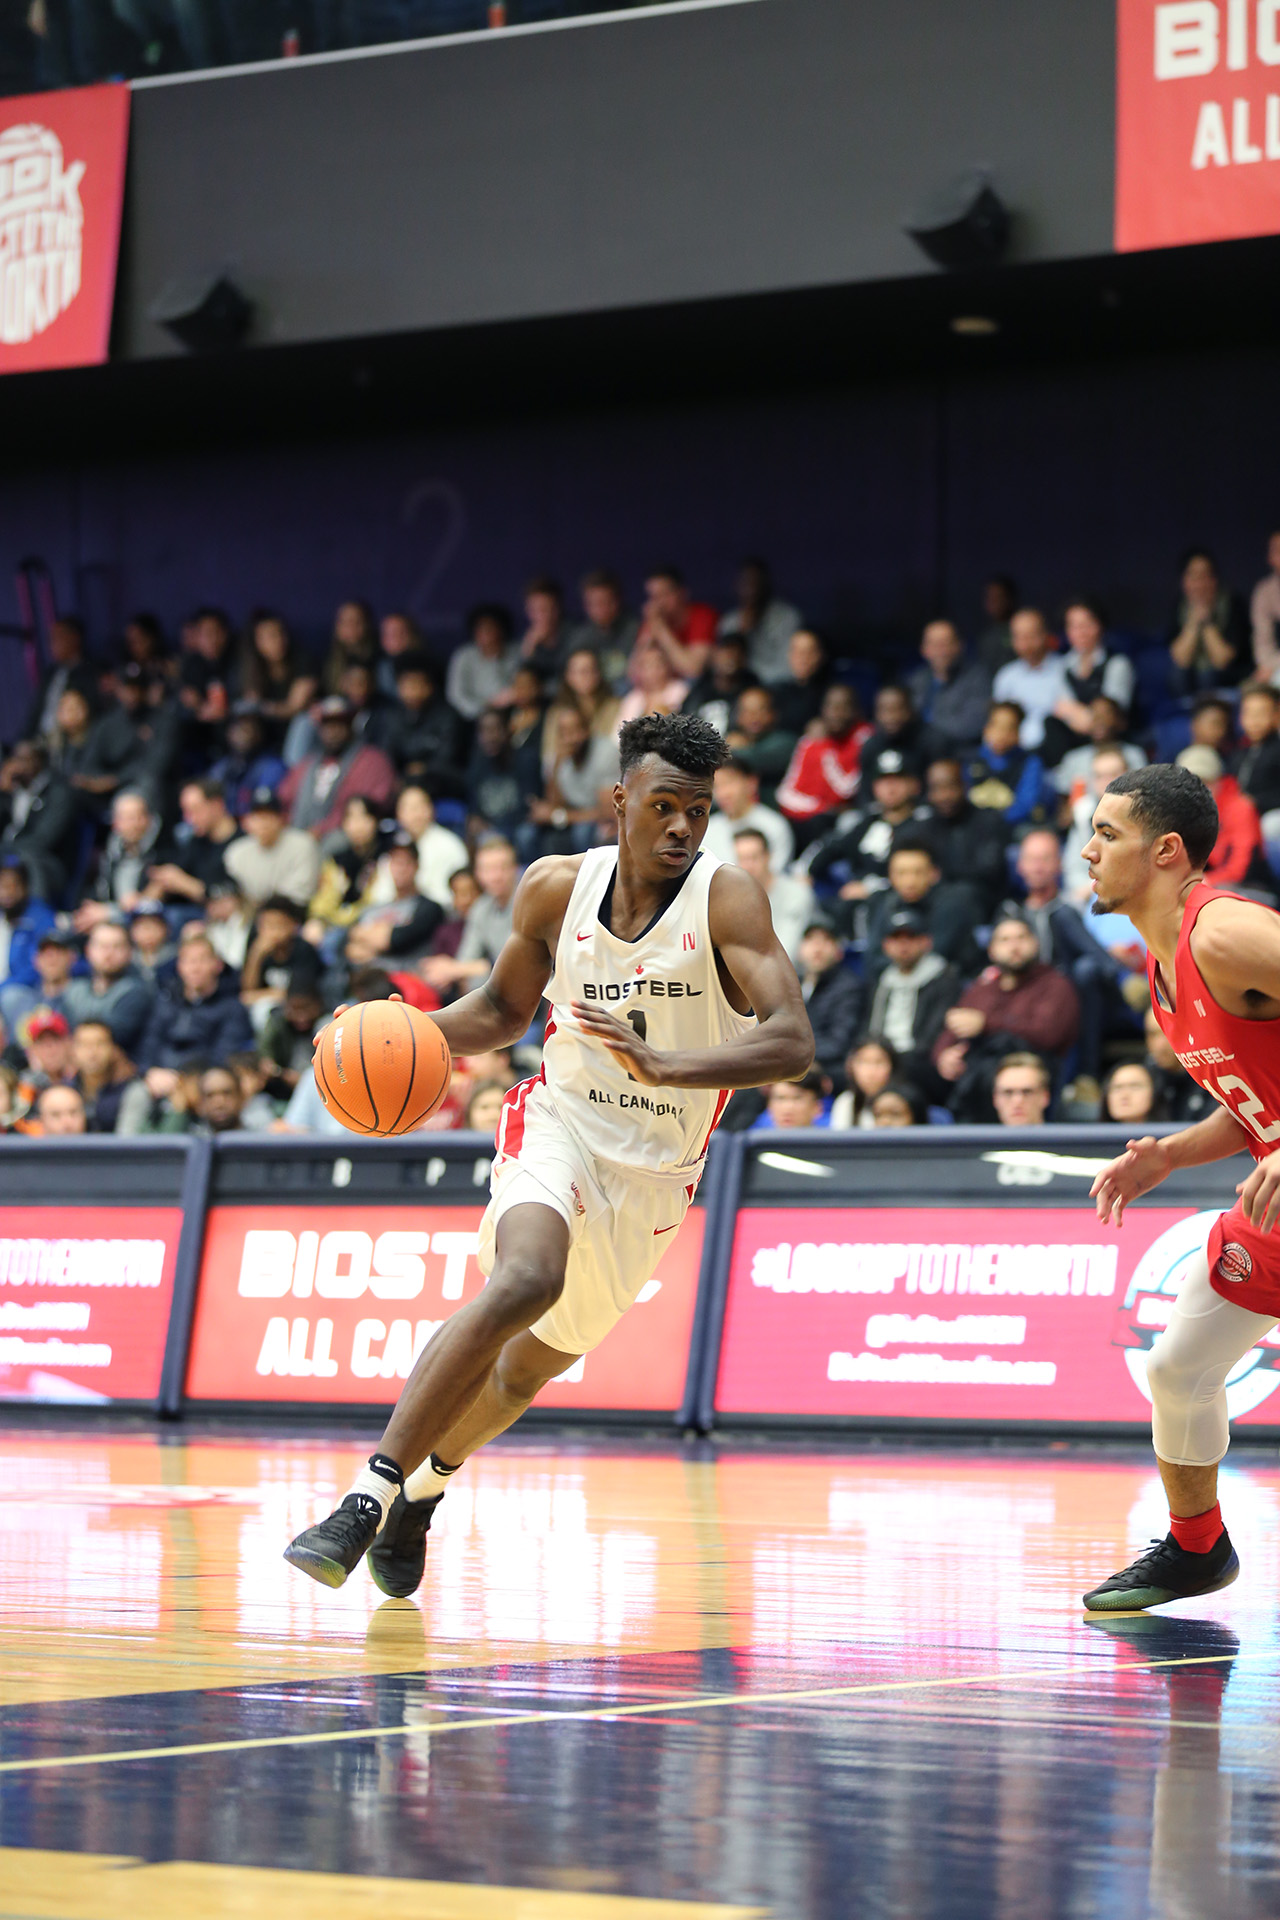 Nike Skills Challenge Events Revealed in Advance of the Expanded BIOSTEEL ALL CANADIAN BASKETBALL GAMES, Airing Live on March 31, Exclusively on TSN 